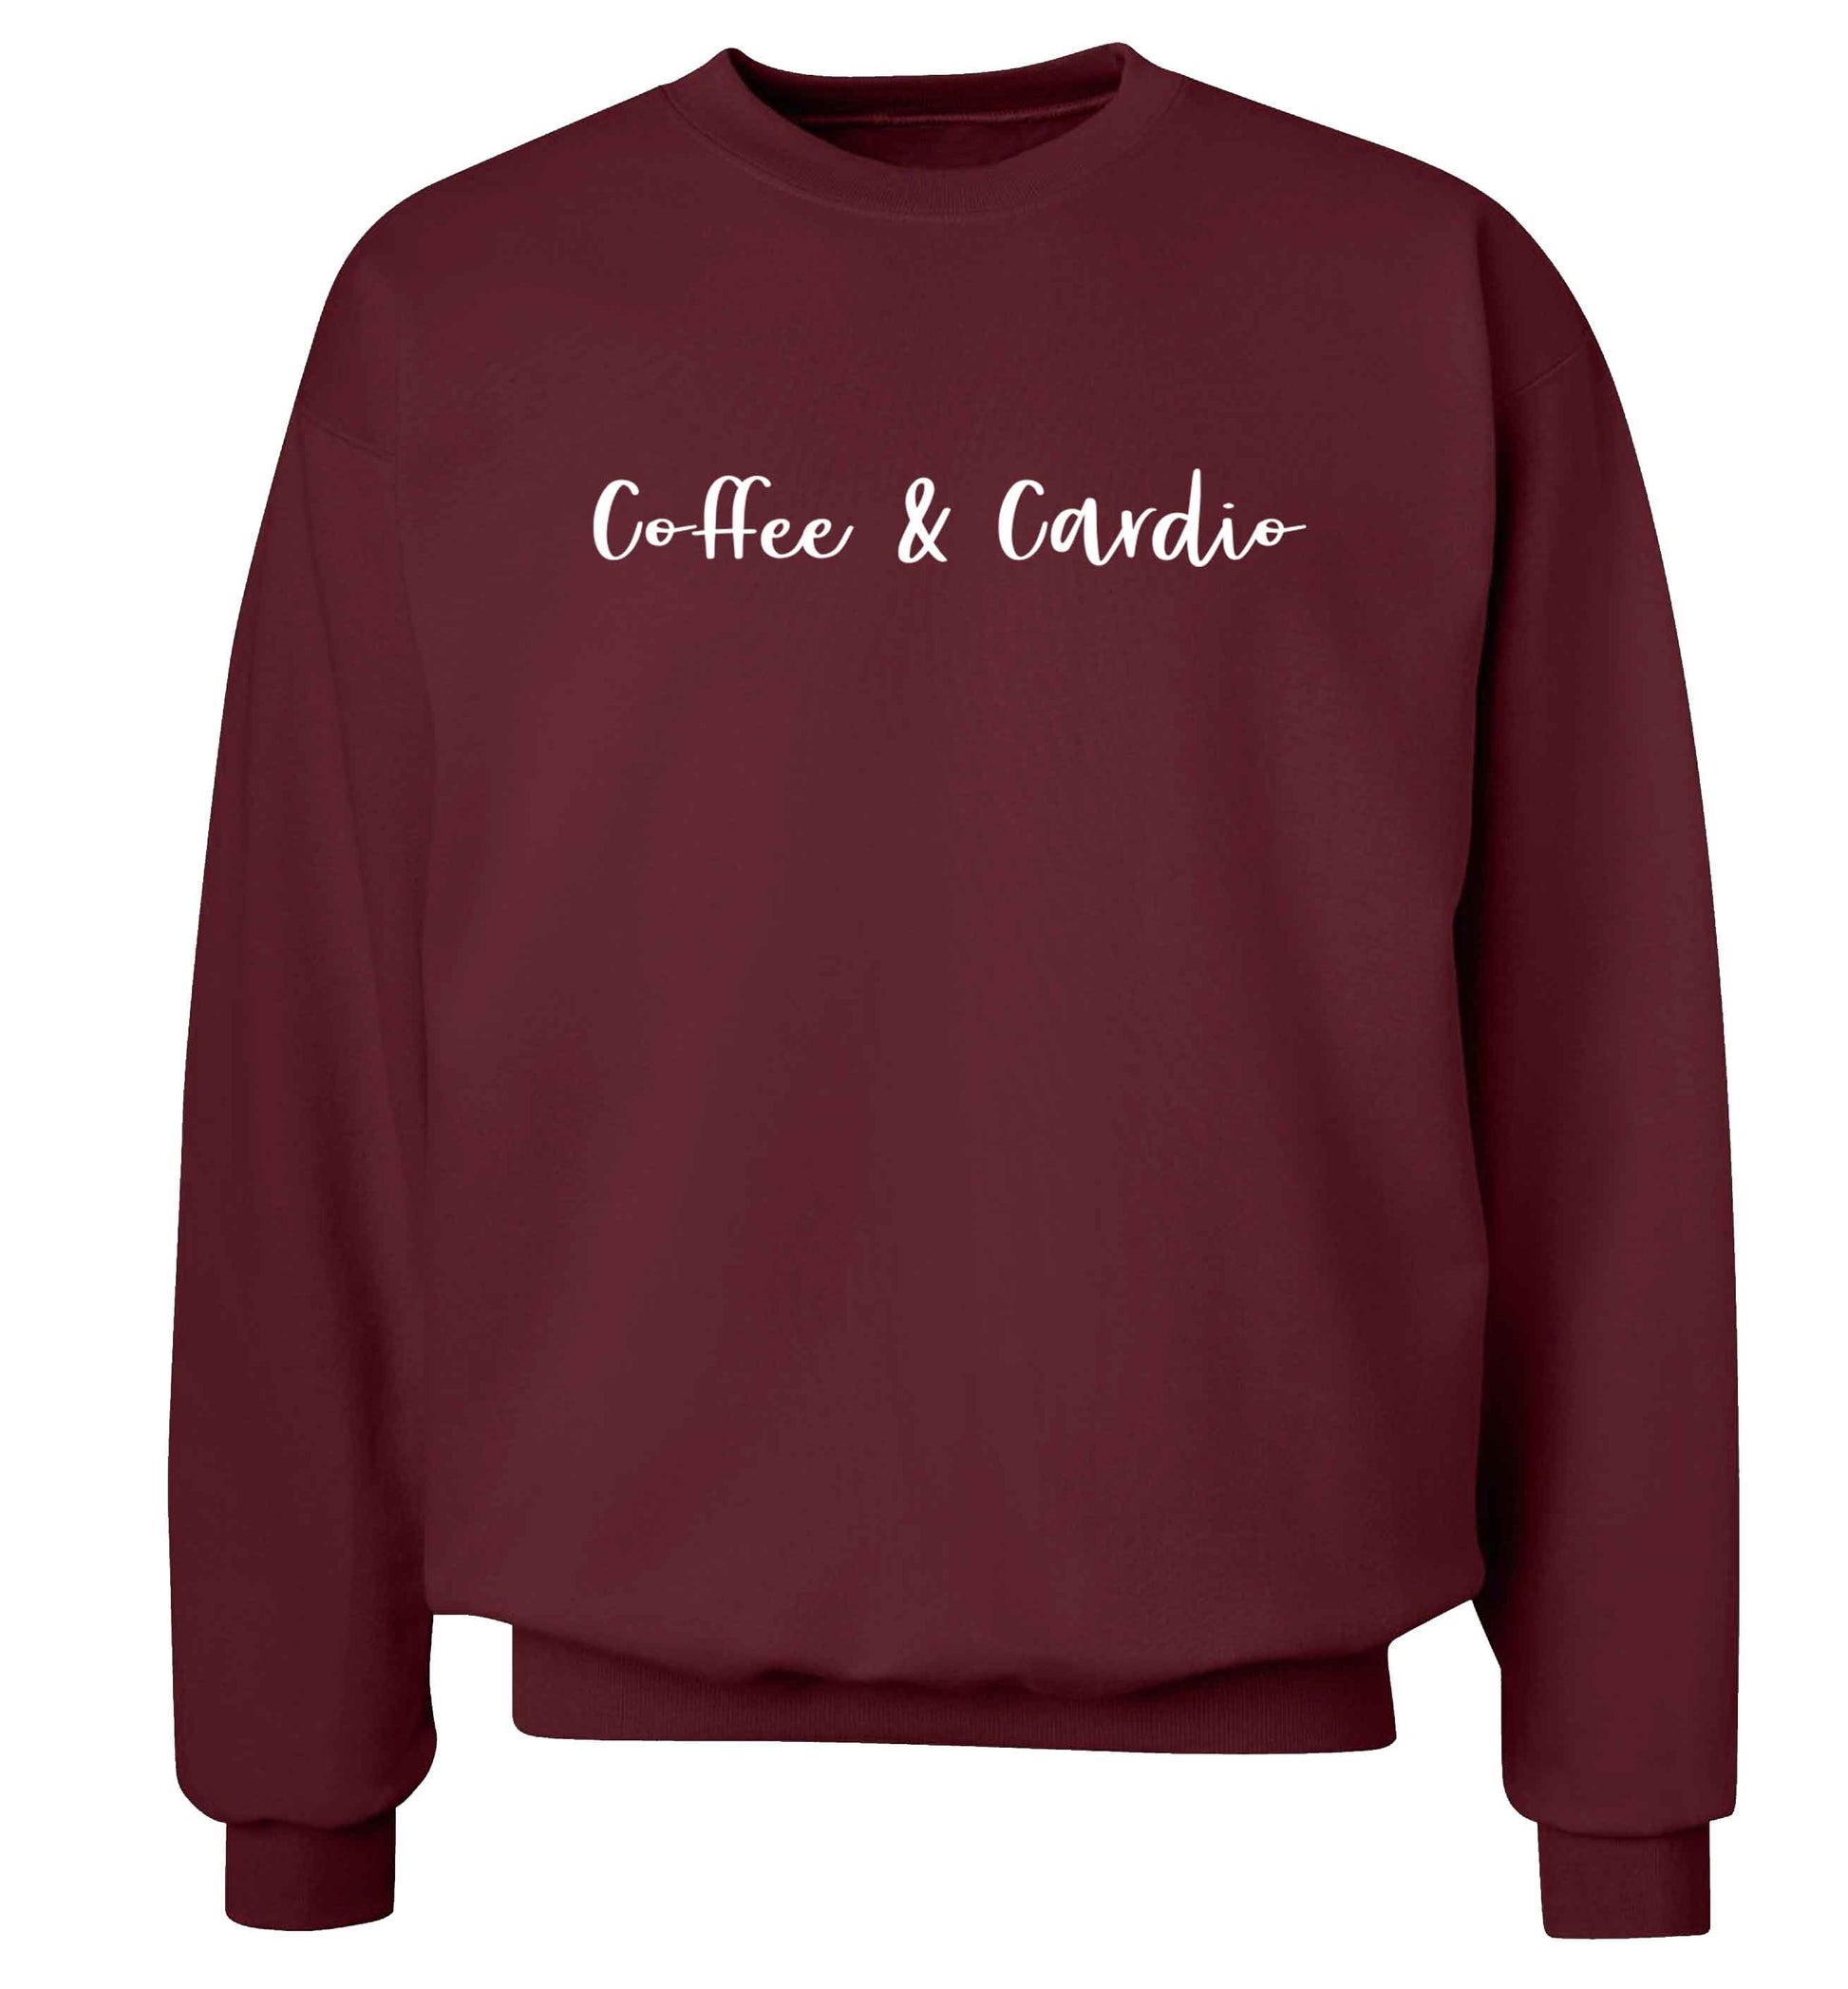 Coffee and cardio Adult's unisex maroon Sweater 2XL